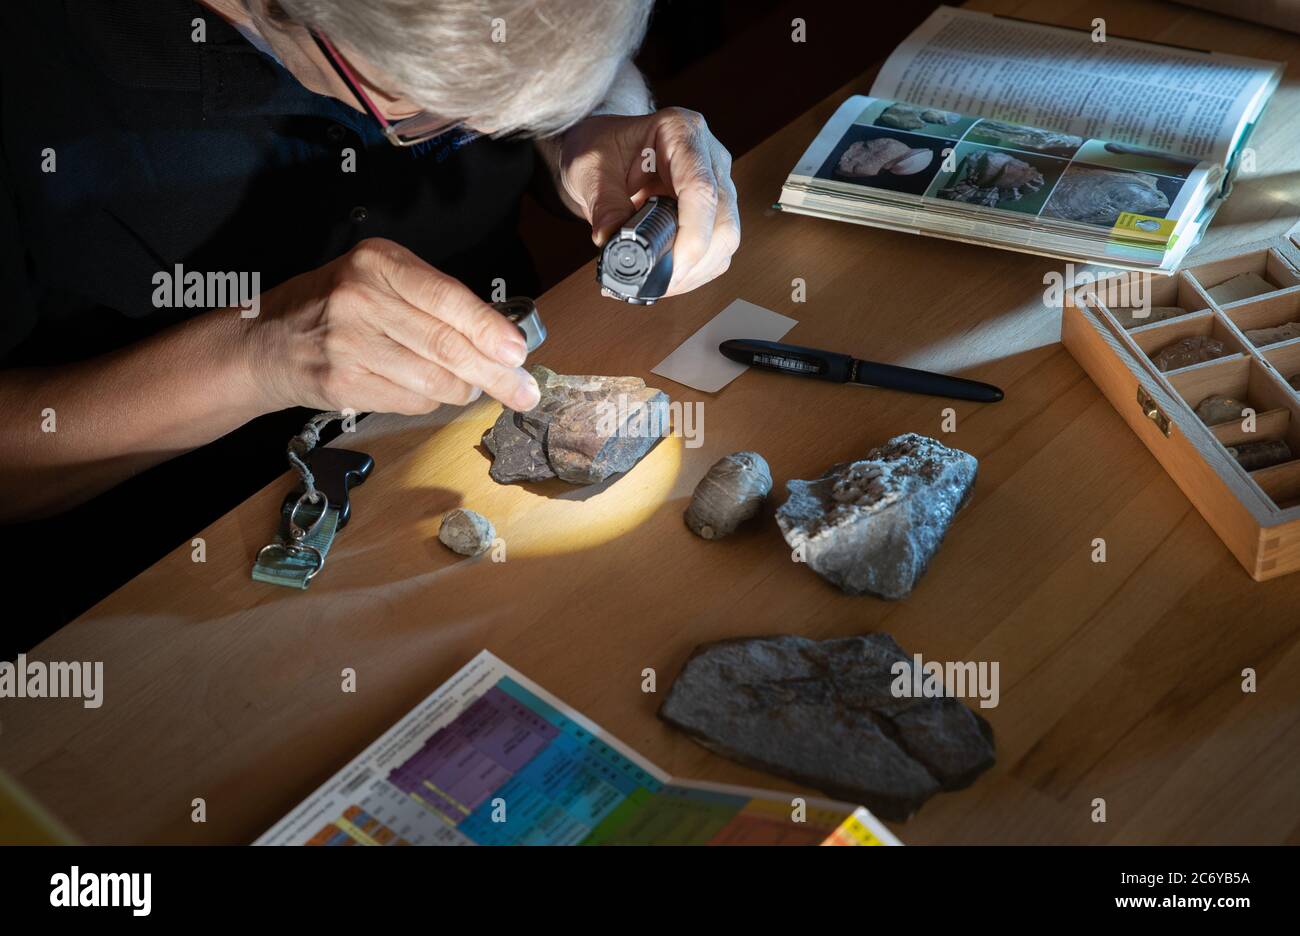 07 July 2020, Lower Saxony, Osnabrück: The geological preparator Angelika Leipner examines a fern seed Reticulopteris münsteri (about 308 million years old). Hobby fossil hunters can visit the geologist once a week and have their finds determined for age and composition. Photo: Friso Gentsch/dpa Stock Photo